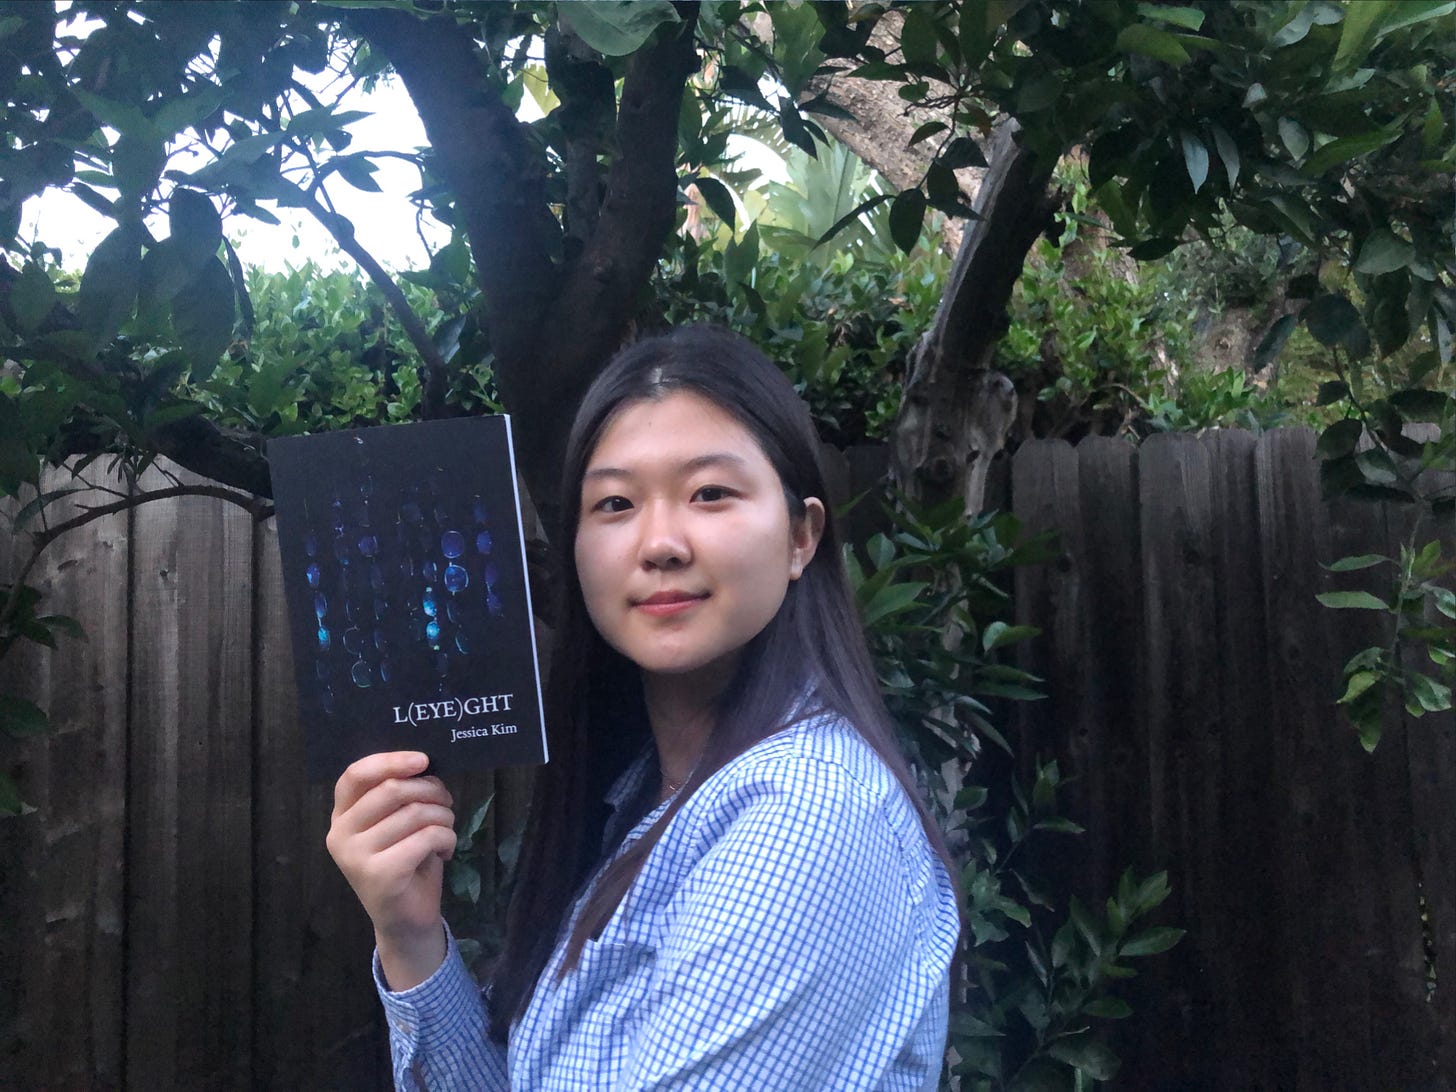 Jessica, a Korean-American, is wearing a blue blouse with tiny blue squares all over it. Not sure what you call that. She is holding her book up to the camera. She is standing outside in a fenced backyard, likely being bit by mosquitoes.